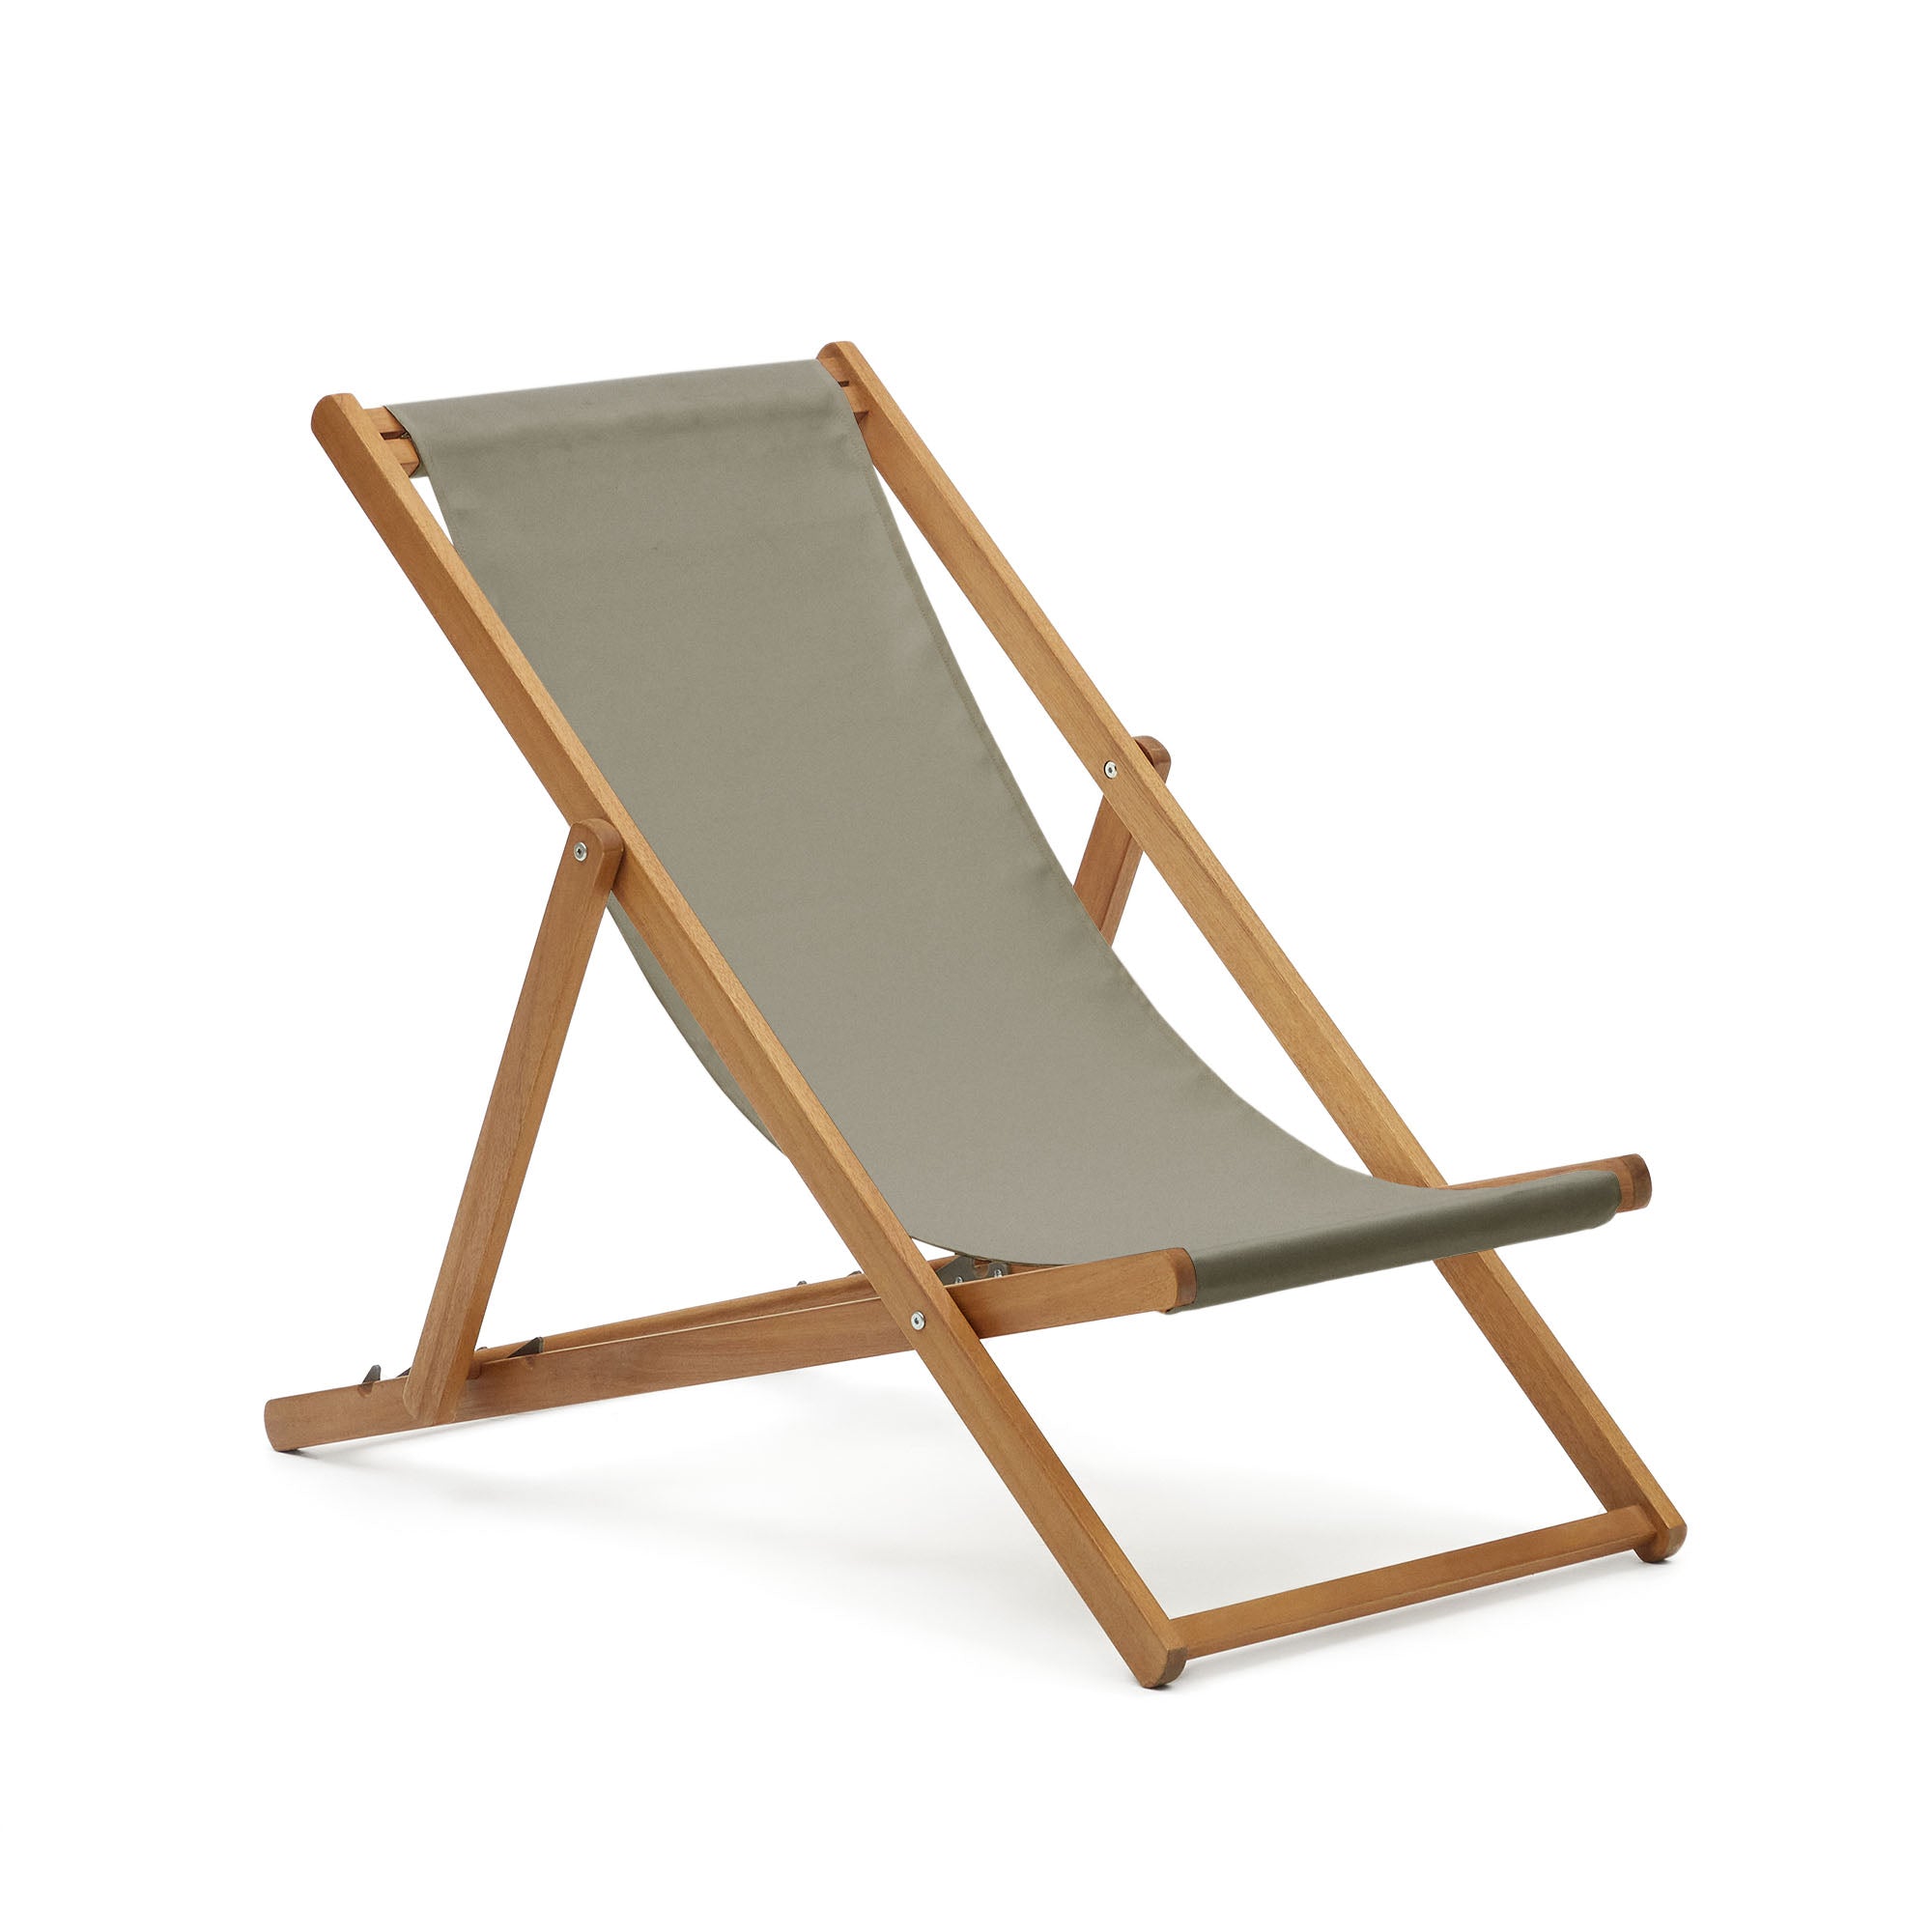 Adredna solid acacia outdoor deck chair in green FSC 100%